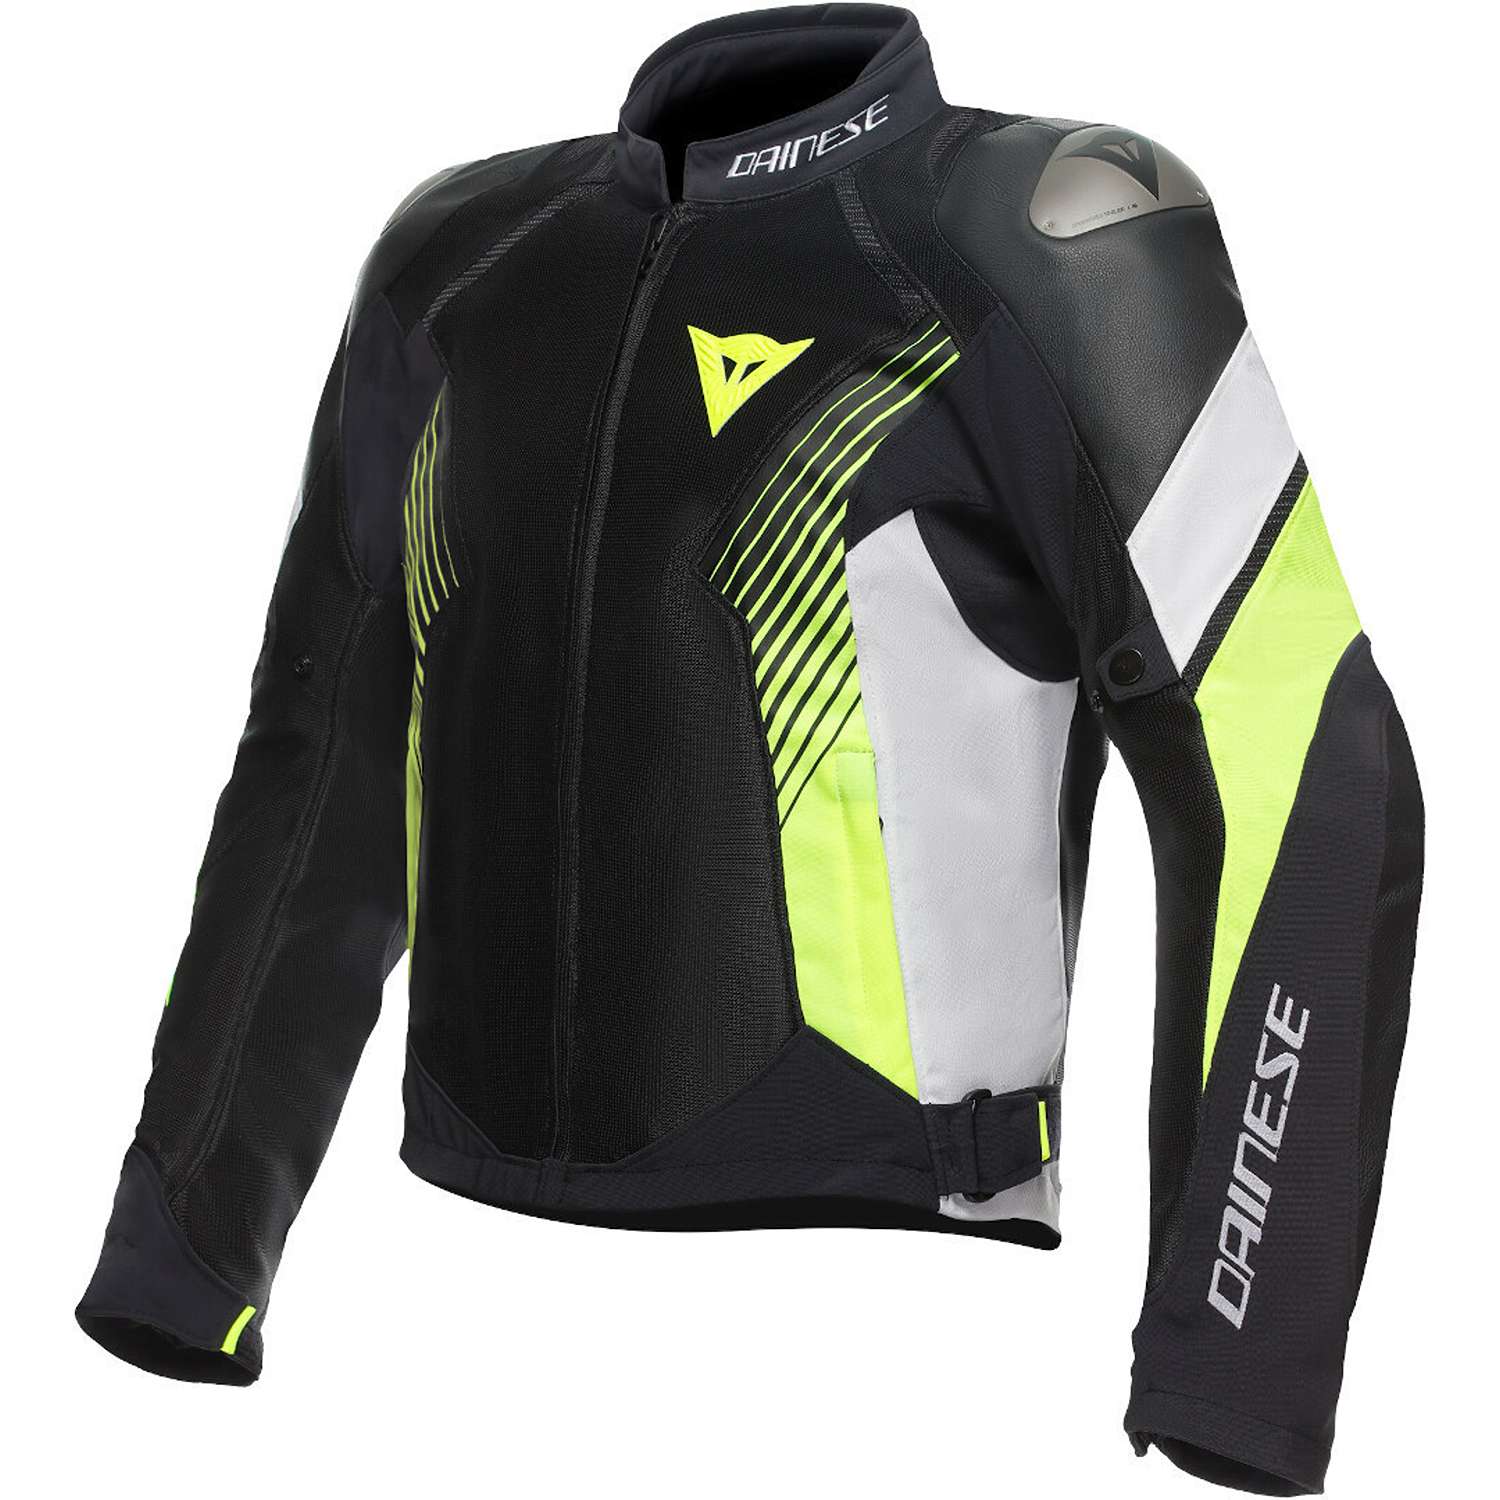 Image of Dainese Super Rider 2 Absoluteshell Jacket Black White Fluo Yellow Taille 58